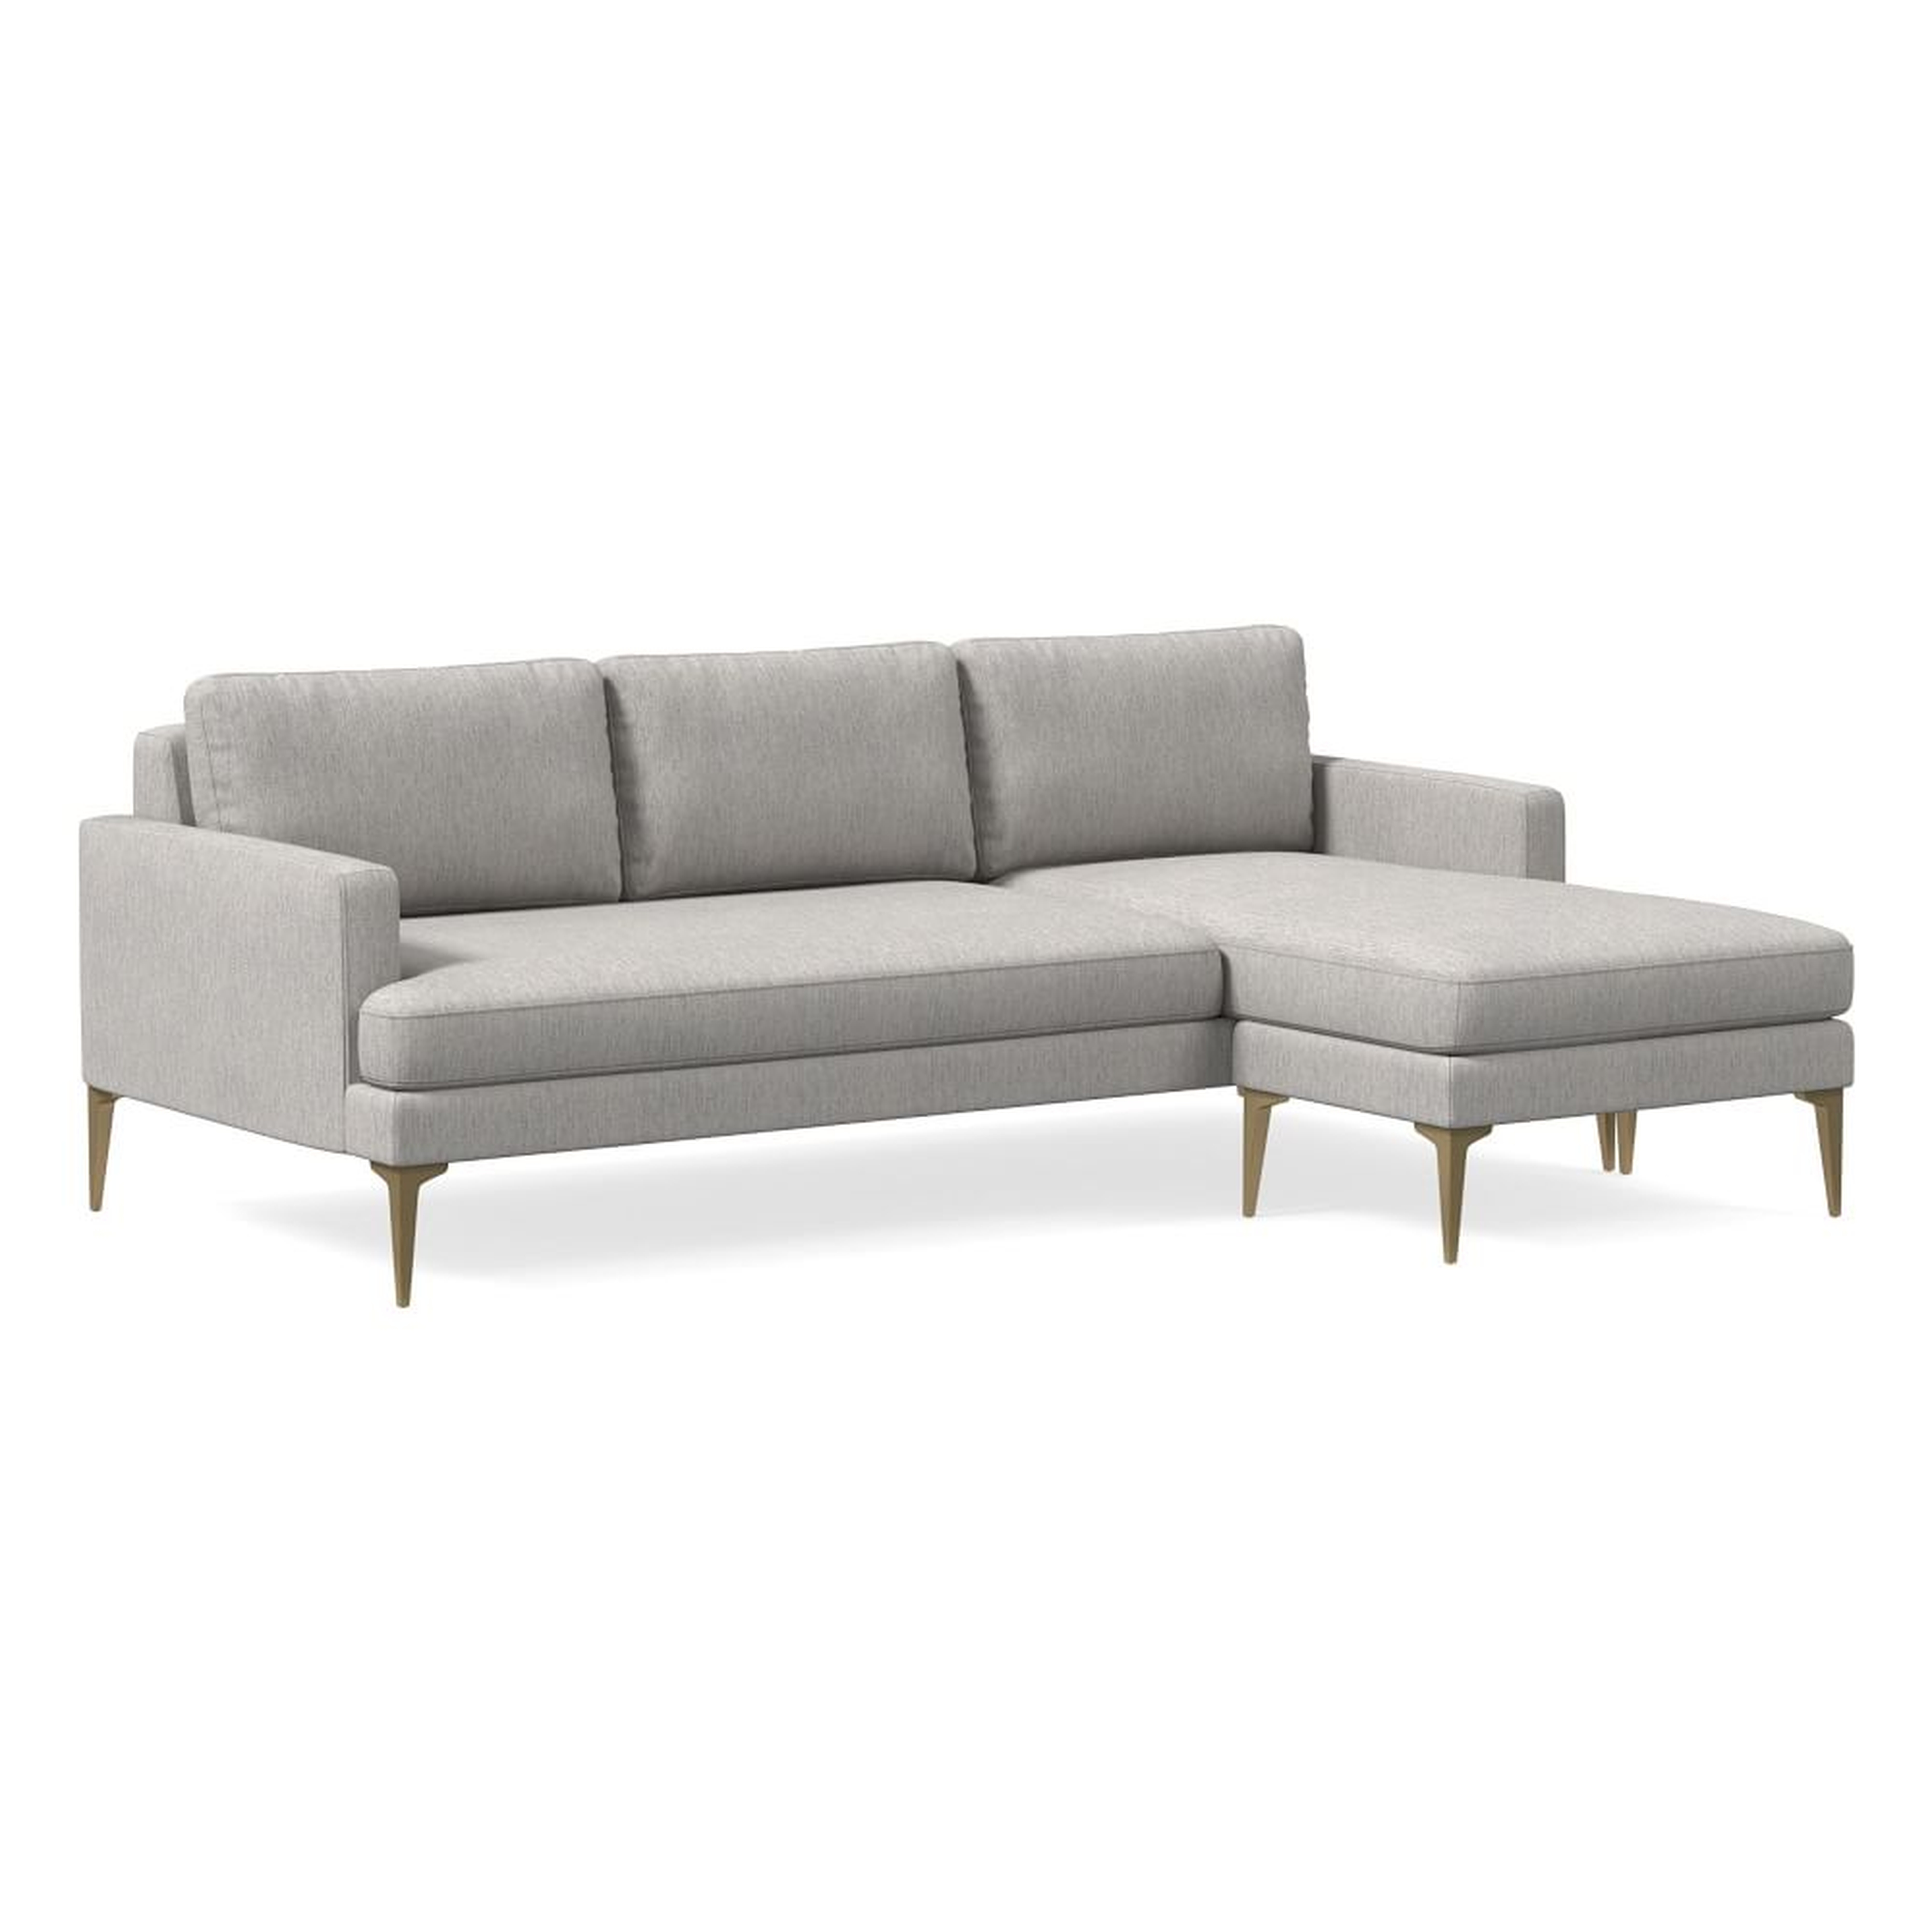 Andes Flip Sectional, Poly, Performance Coastal Linen, Storm Gray, Blackened Brass - West Elm